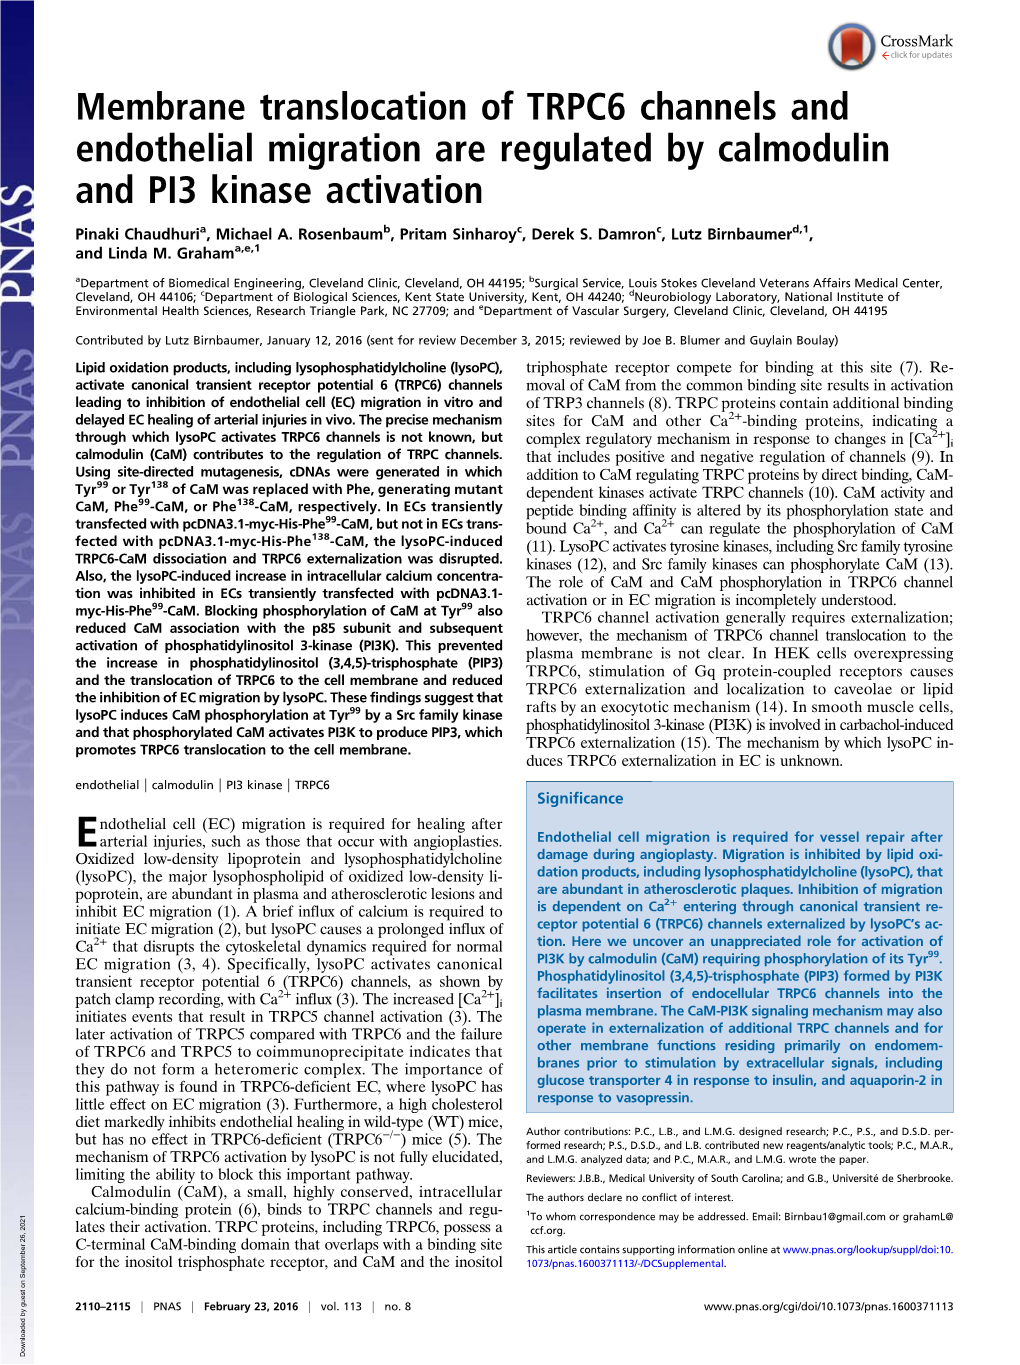 Membrane Translocation of TRPC6 Channels and Endothelial Migration Are Regulated by Calmodulin and PI3 Kinase Activation